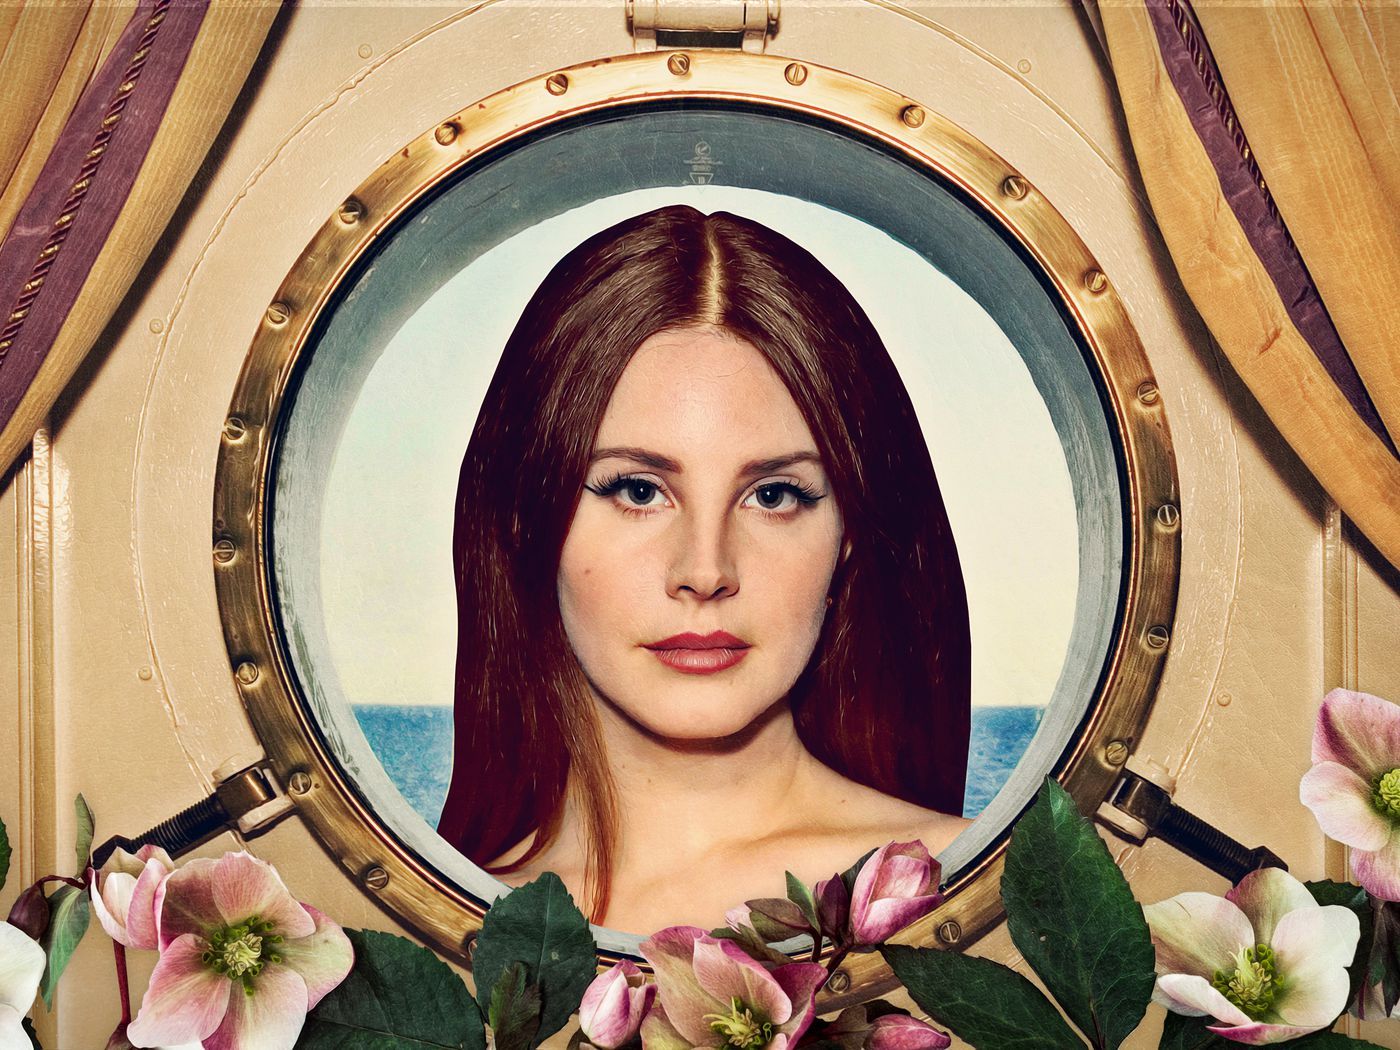 Lana Del Rey Is the Benevolent Spirit Guide of Our Times